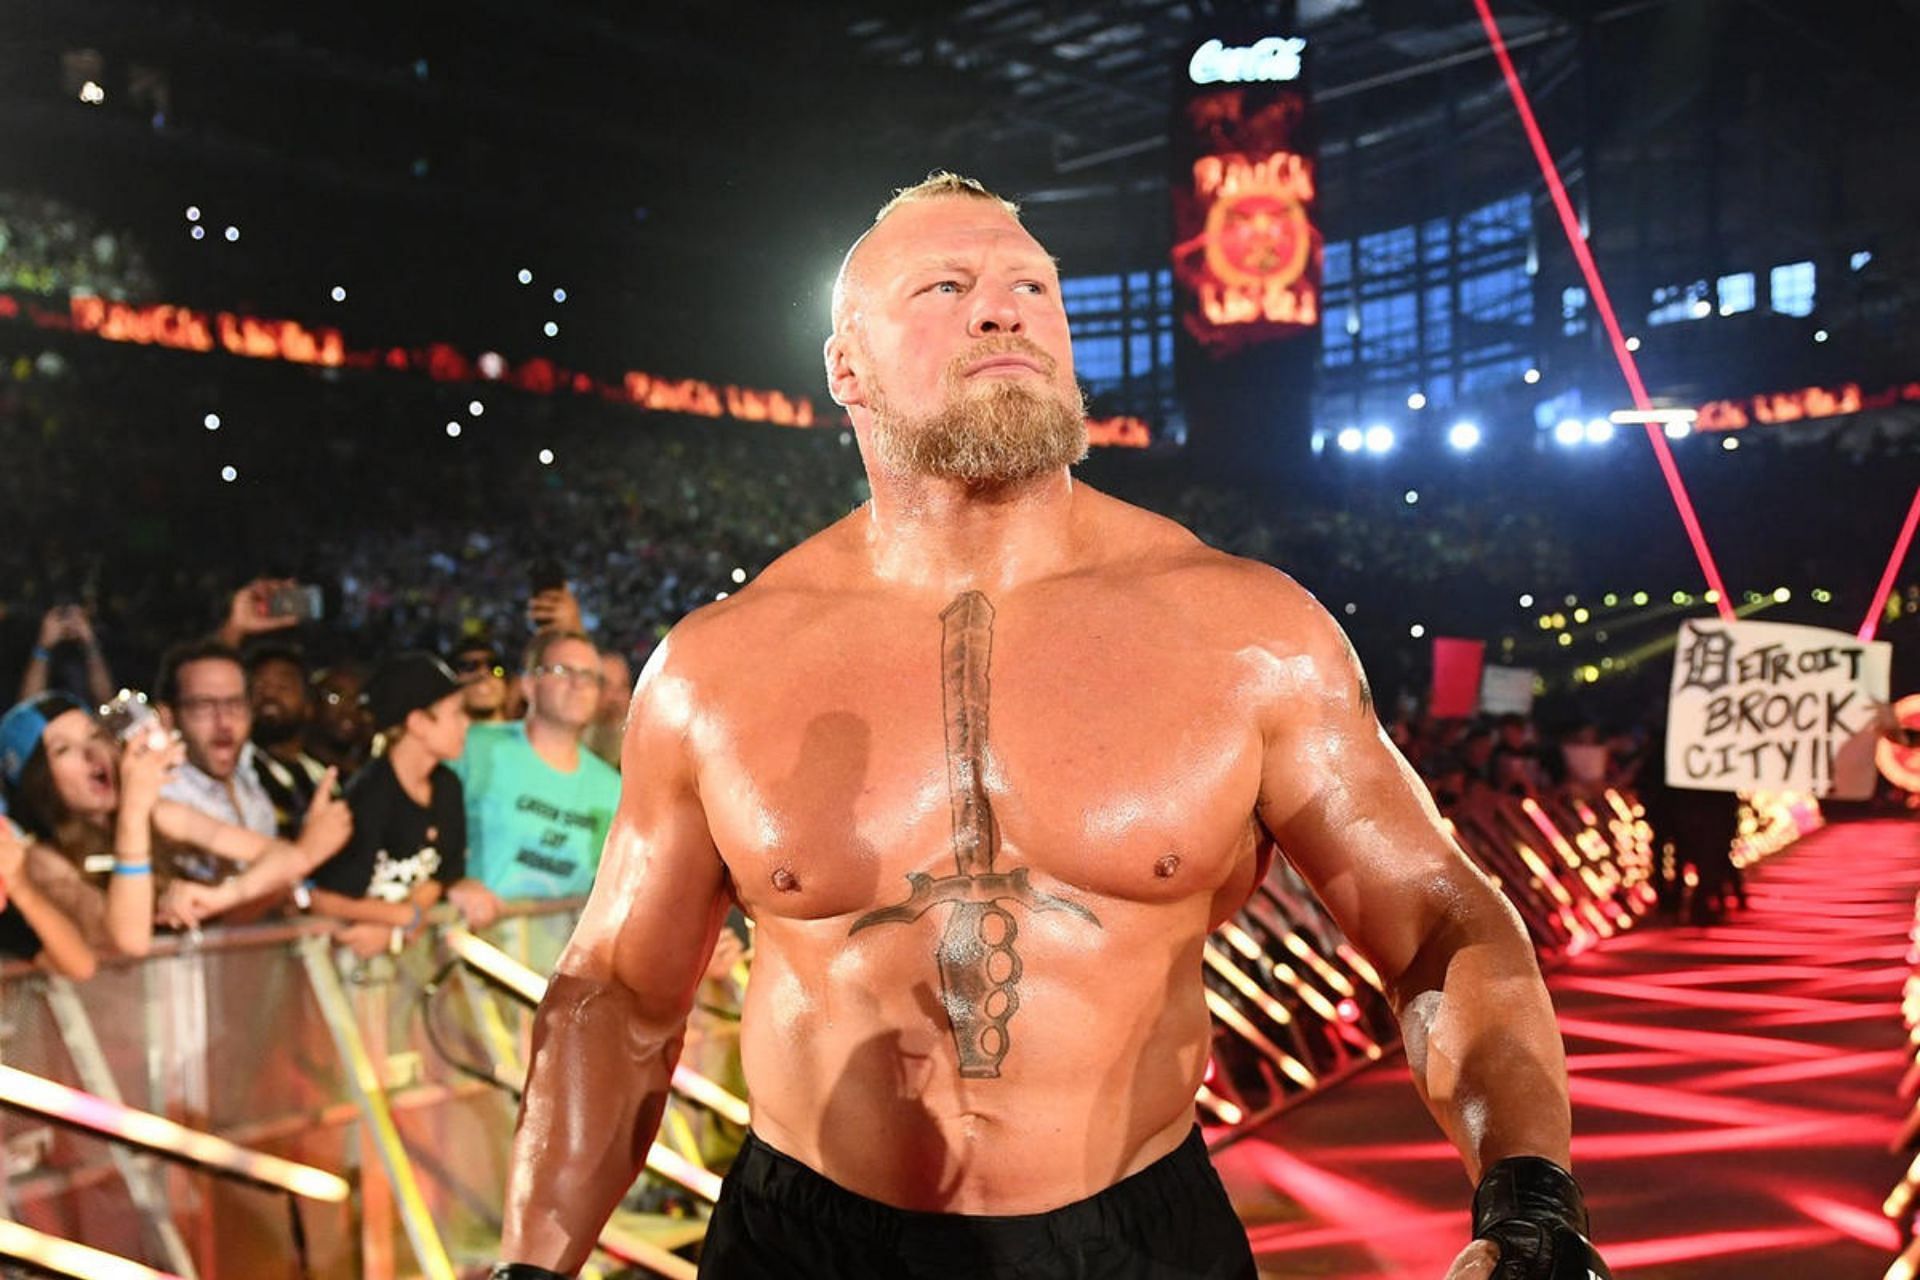 Brock might have face a brand new opponent at Wrestlemania 40 [Image Credit: WWE.com]